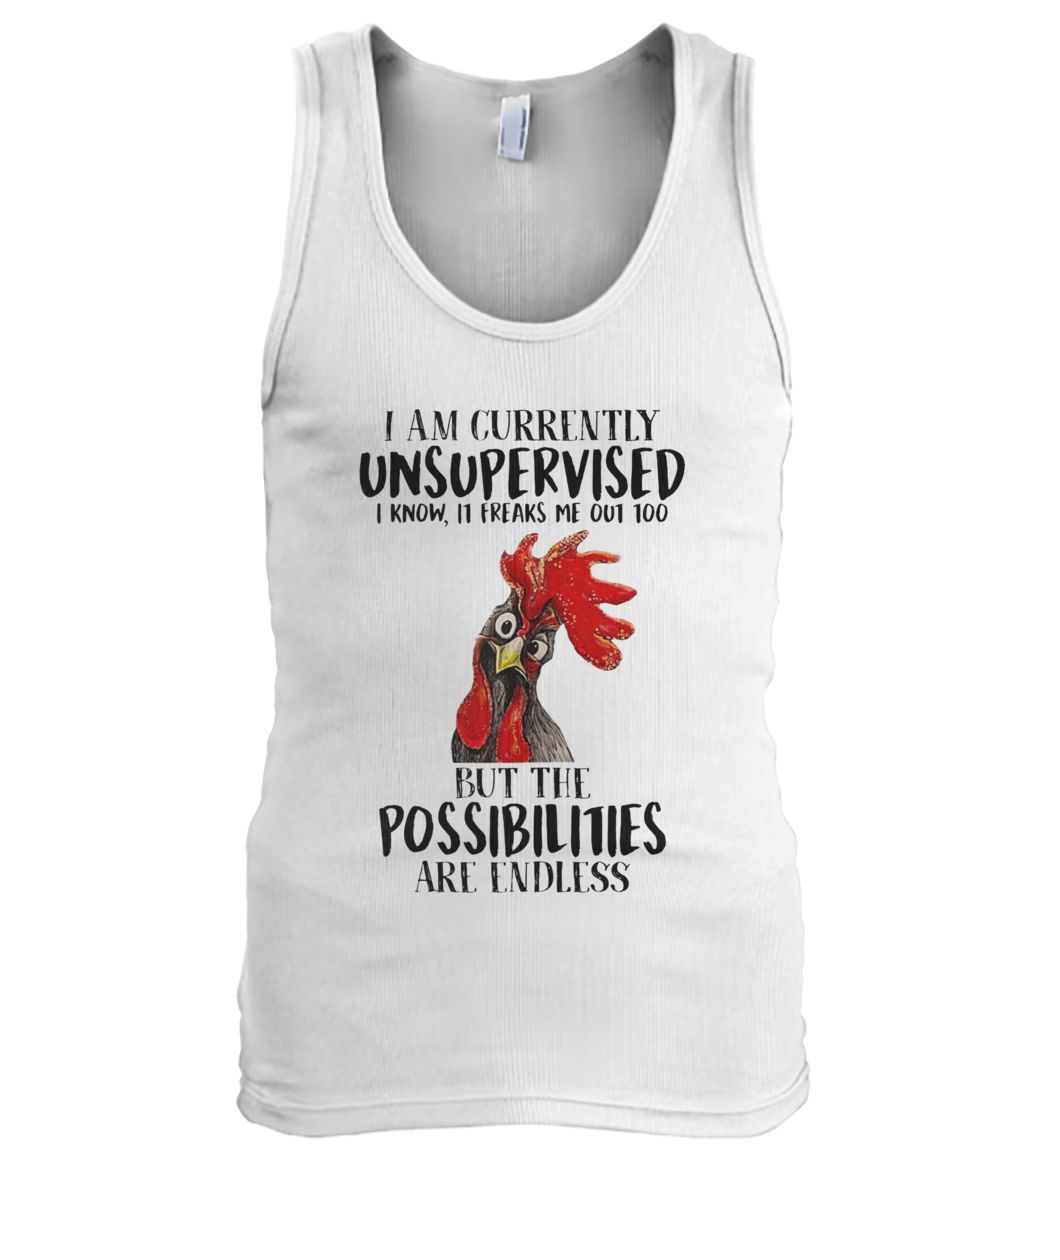 Rooster chicken I am currently unsupervised I know it freaks me out too men's tank top